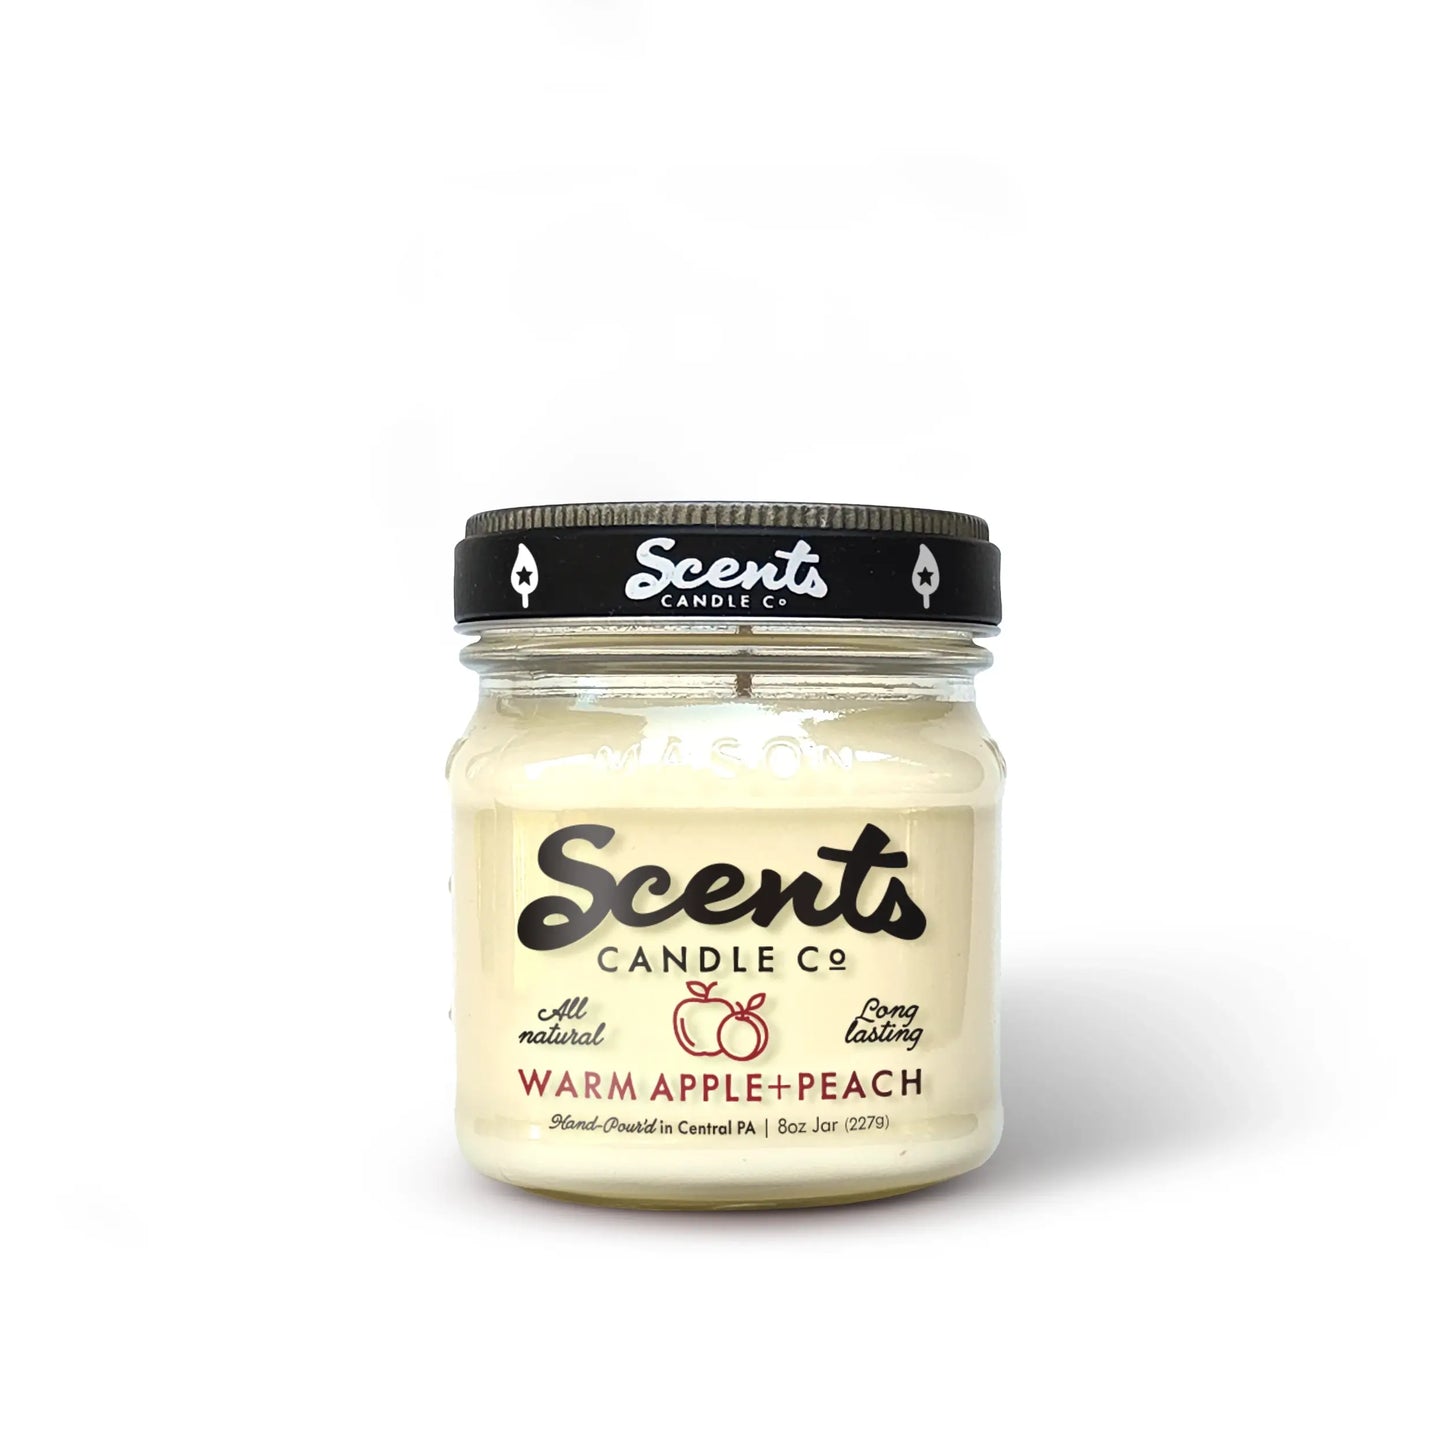 Scents Candle Co. Warm Apple + Peach Soy Wax Candles